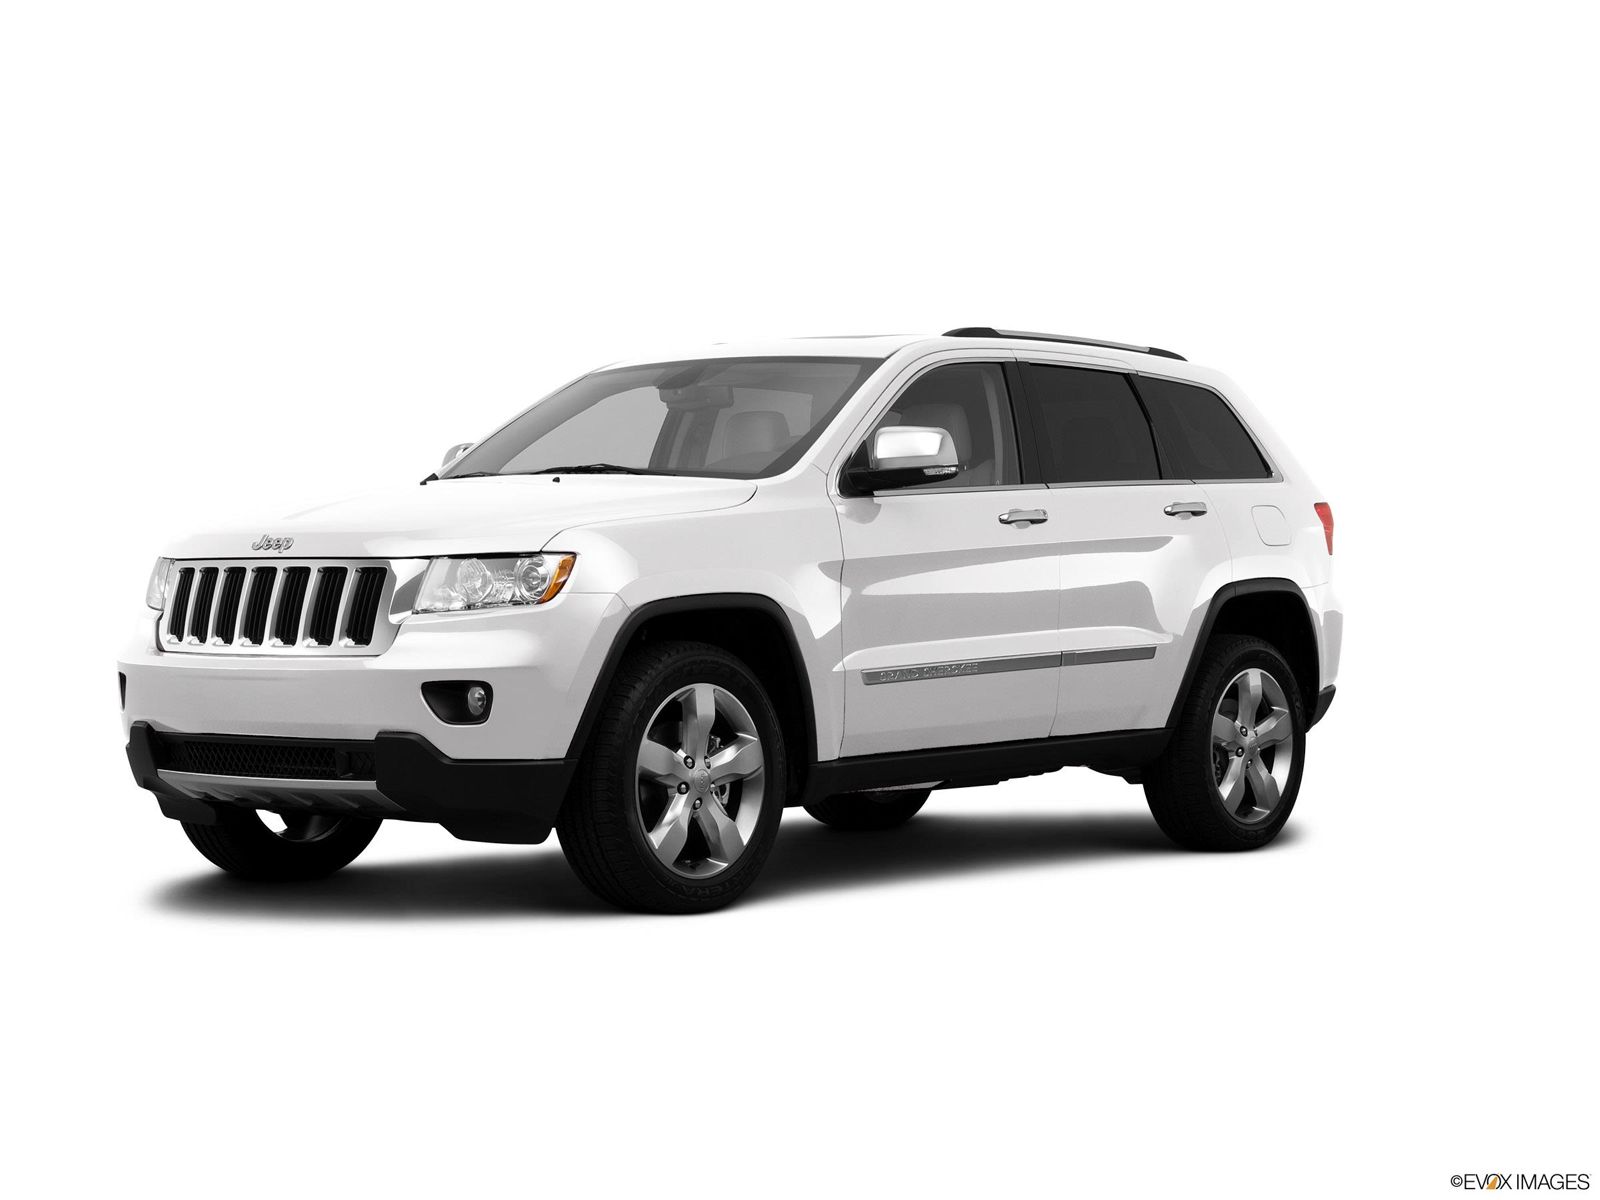 2013 Jeep Grand Cherokee Research, photos, specs, and expertise | CarMax